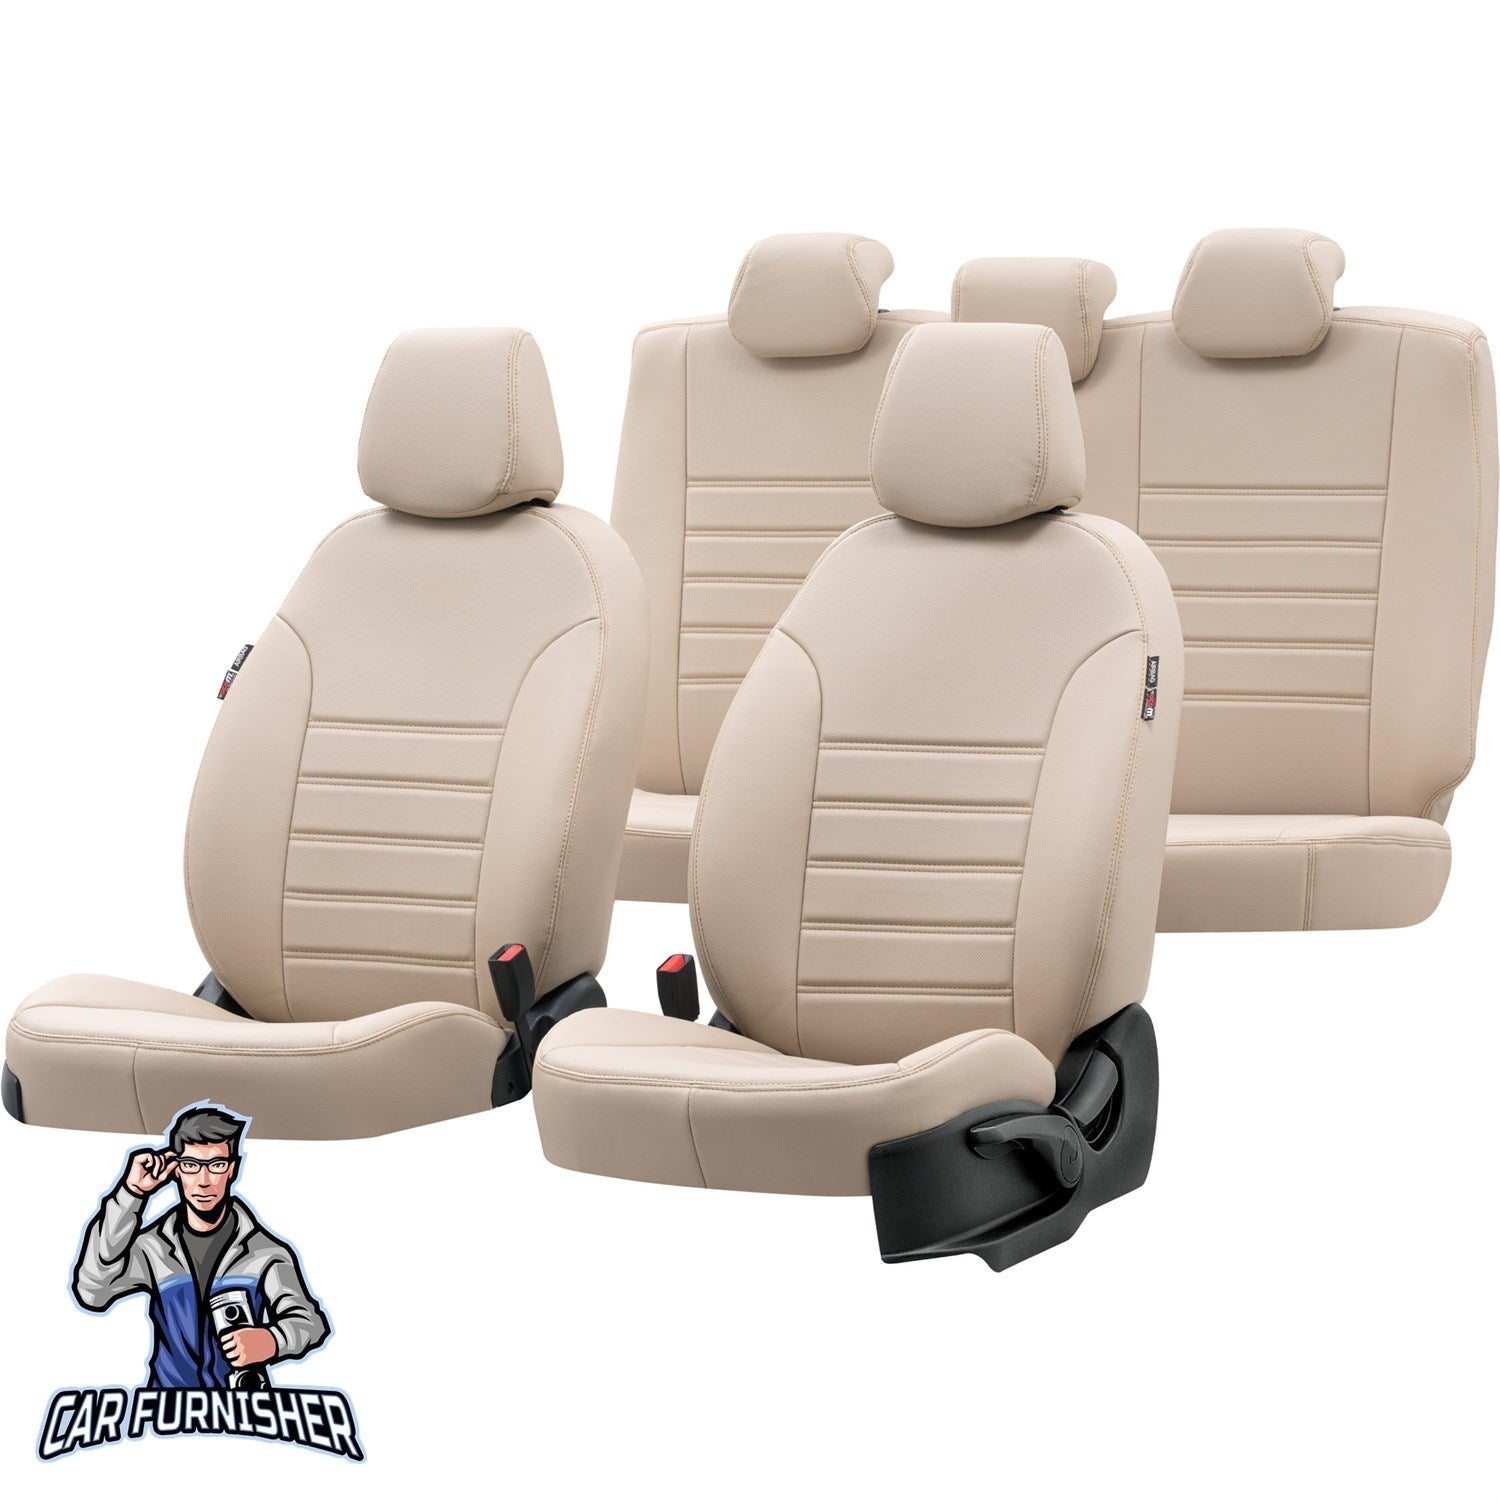 Seat Mii Seat Covers Istanbul Leather Design Beige Leather